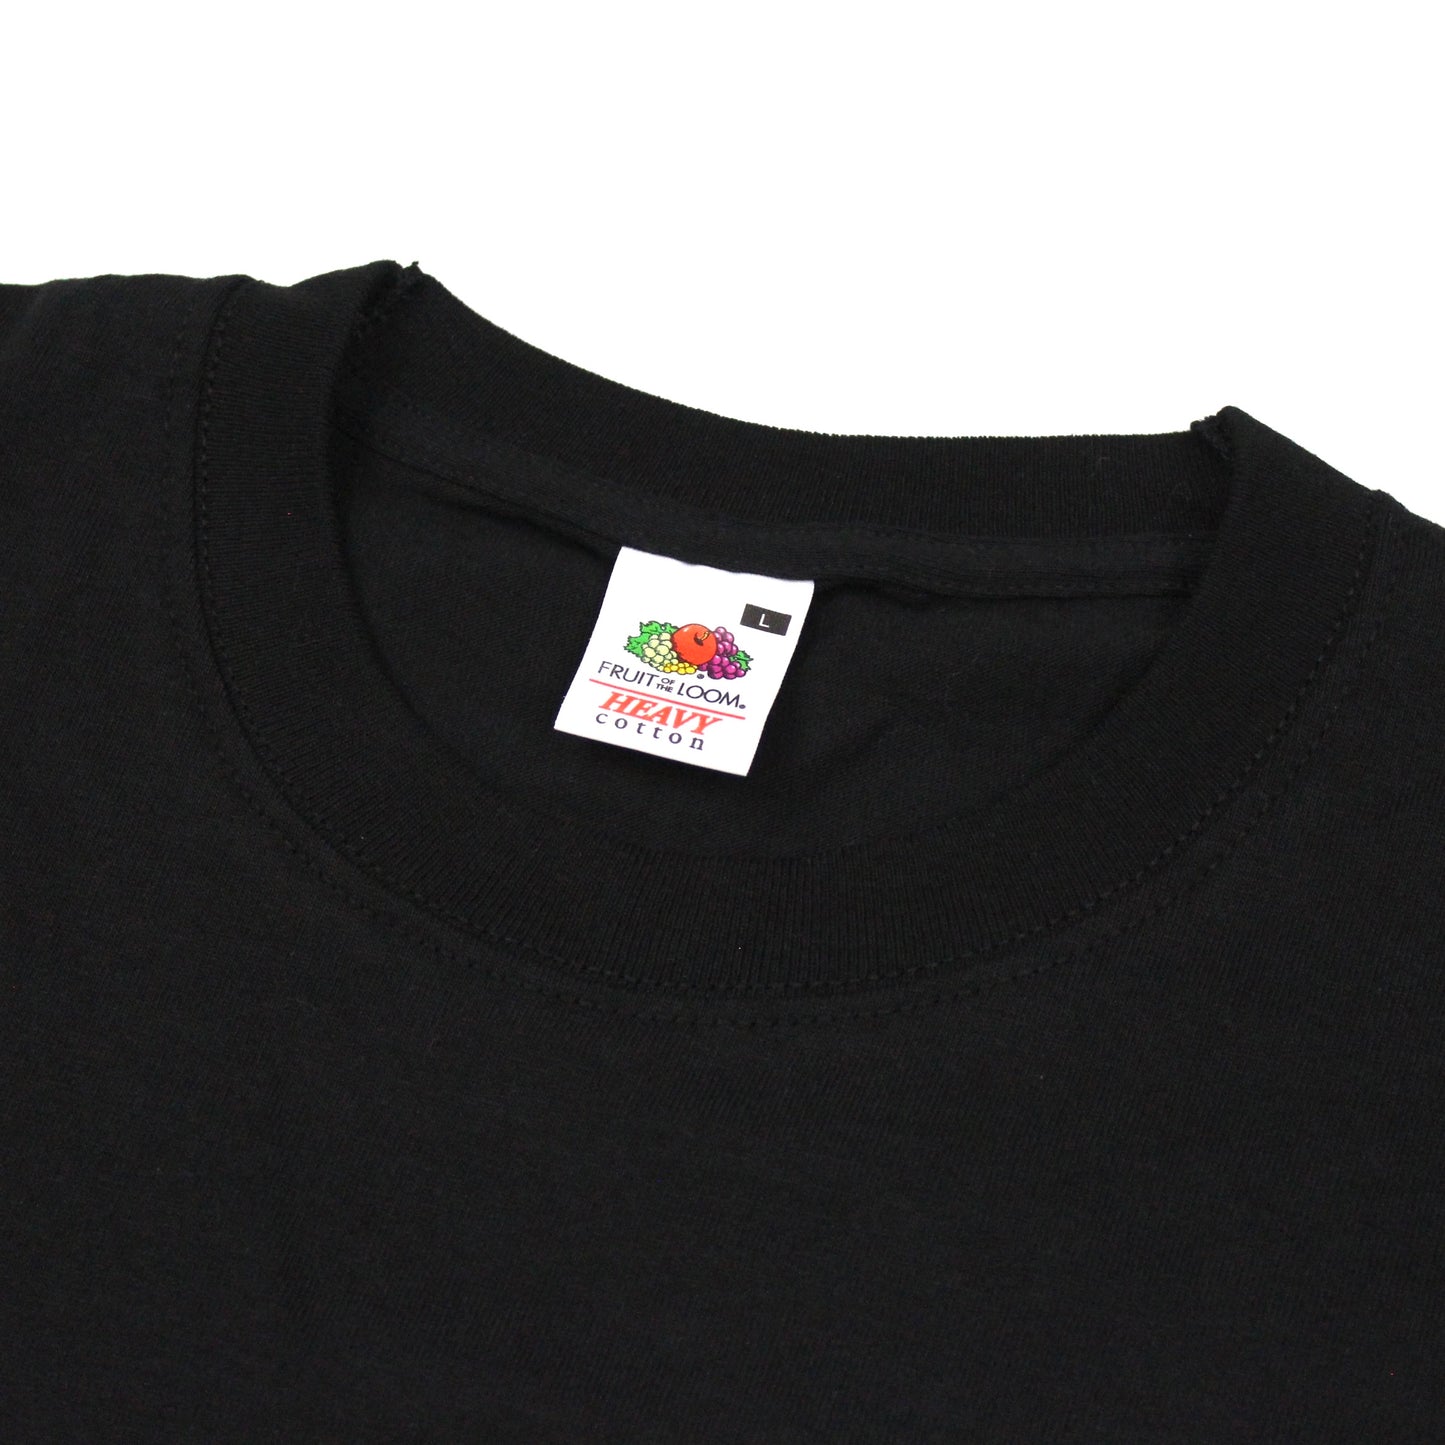 Carling Lager Black T-Shirt, Fruit of the Loom Tag (L)